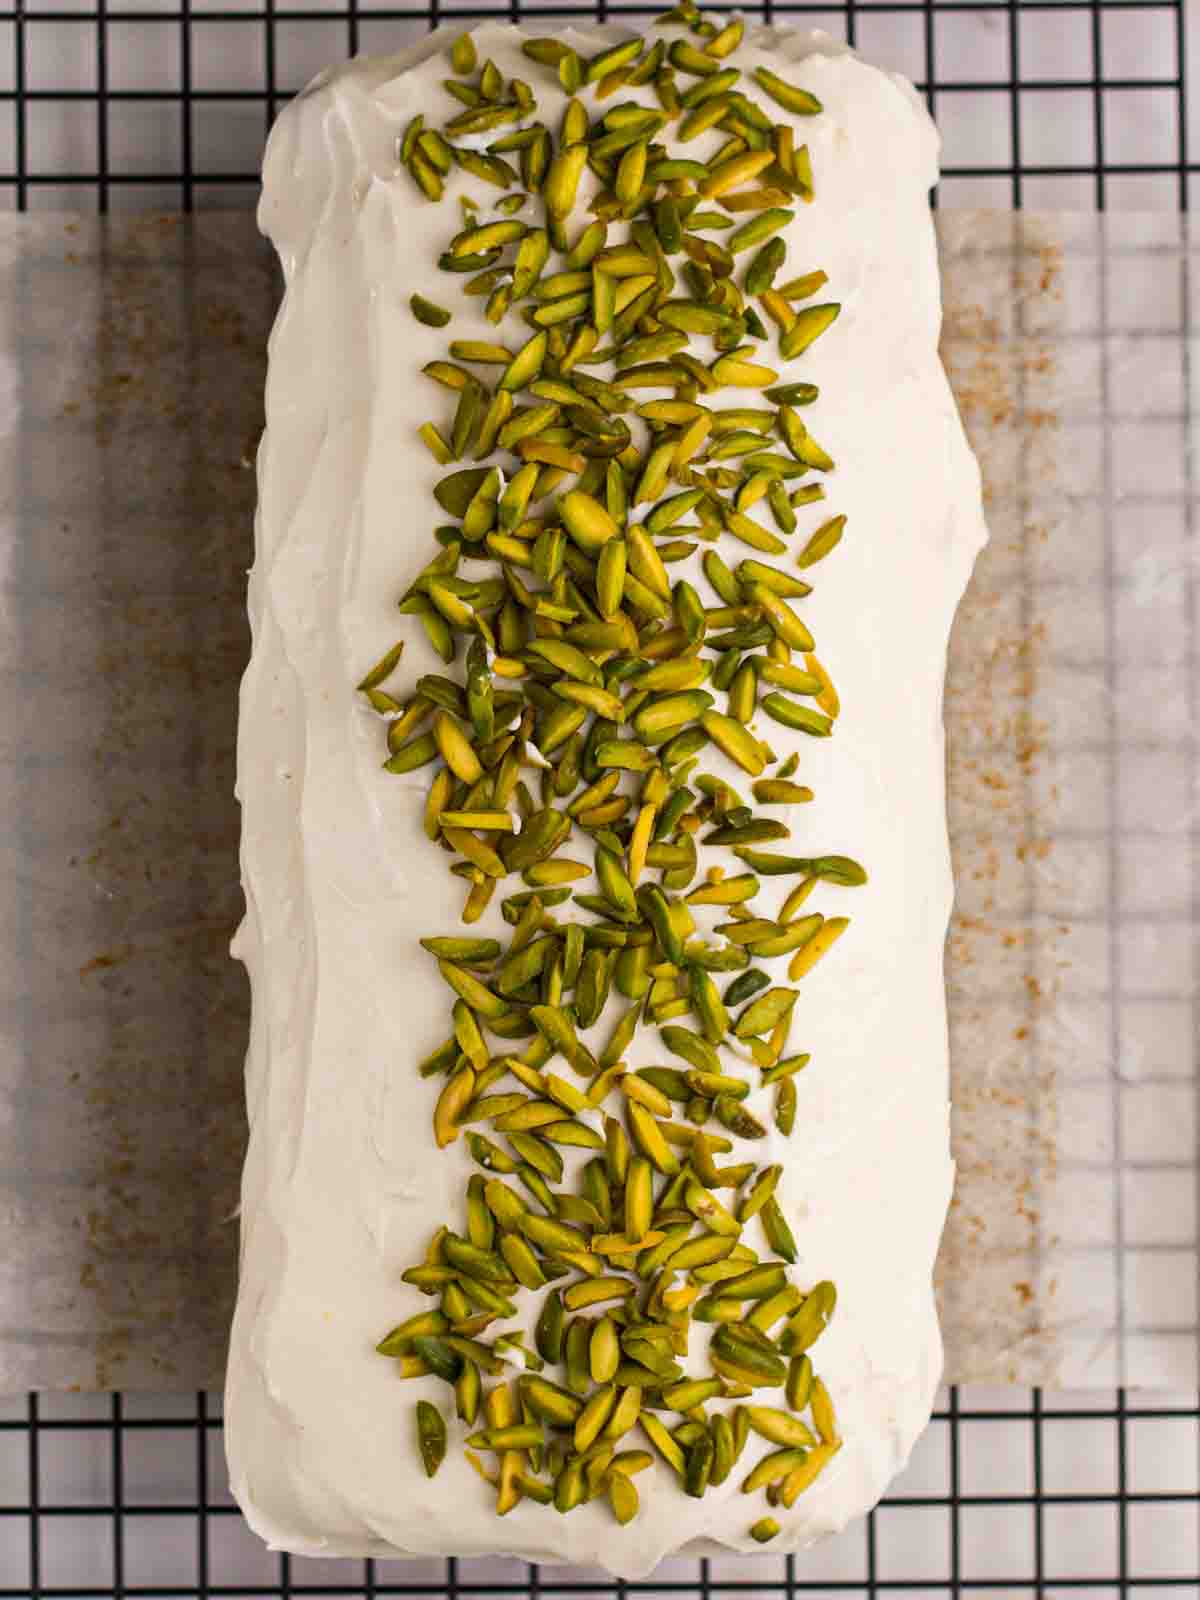 Bird's eye view of a finished and decorated Courgette Cake, with green pistachio flakes on top.